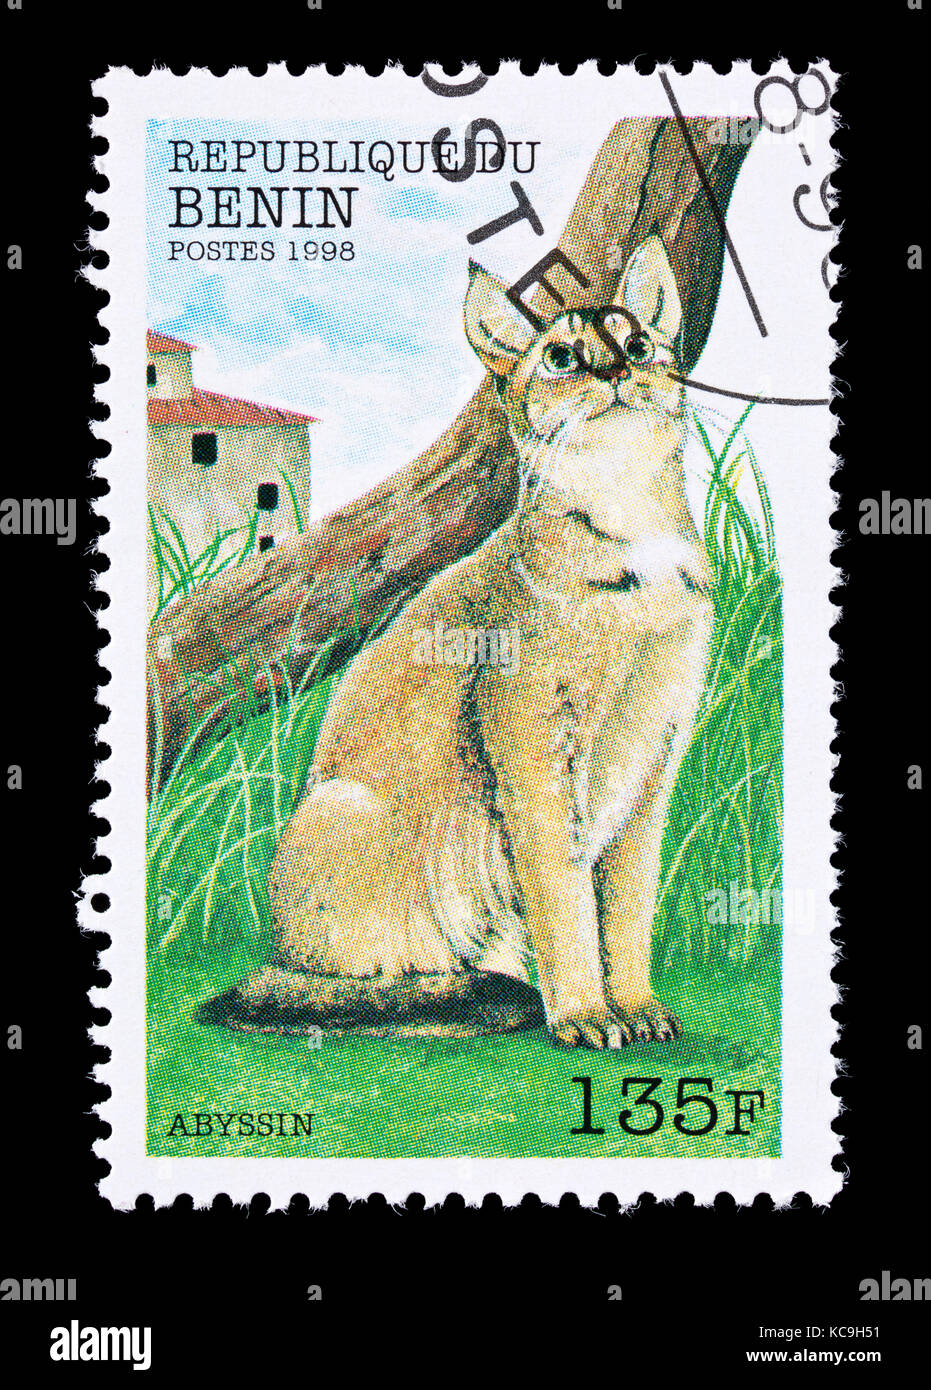 Postage stamp from Benin depicting an Abyssinian breed of house cat. Stock Photo